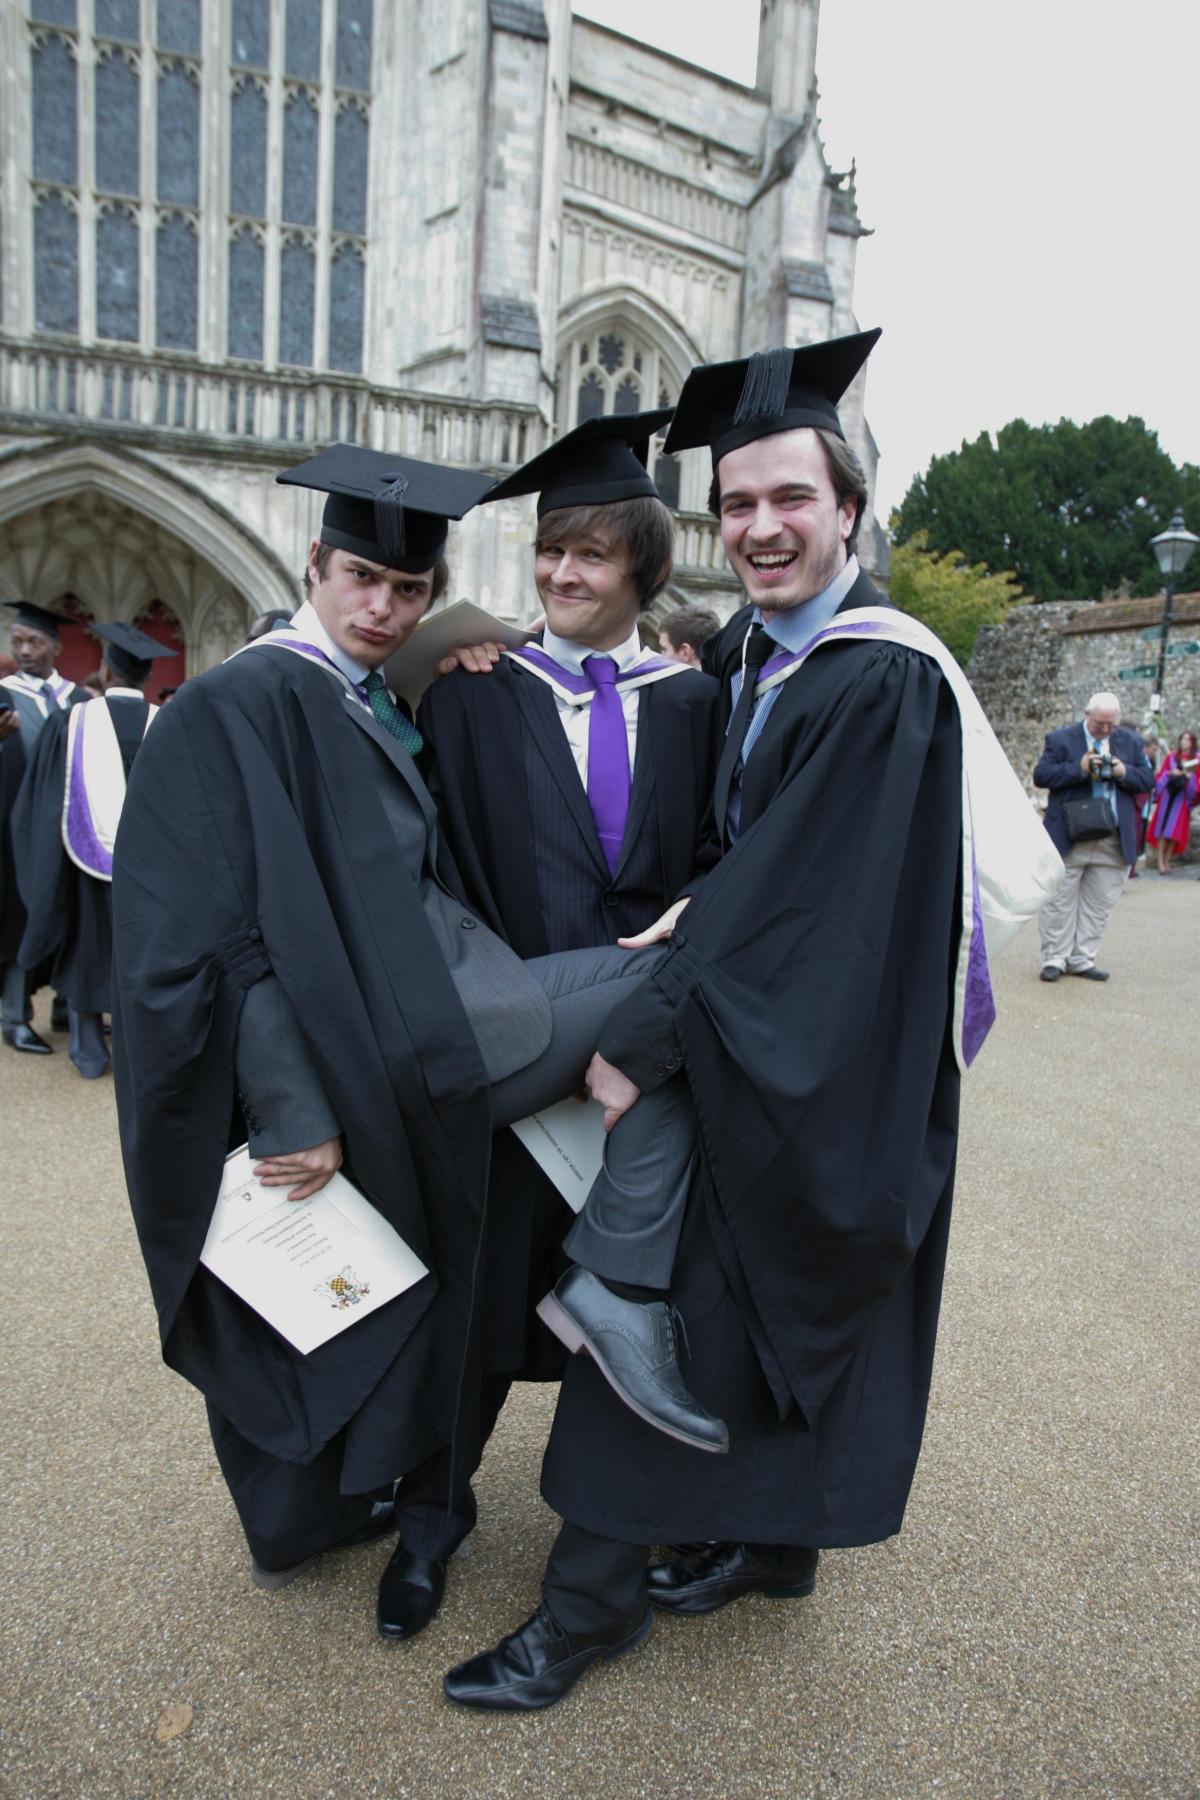 Graduation day for University of Winchester.